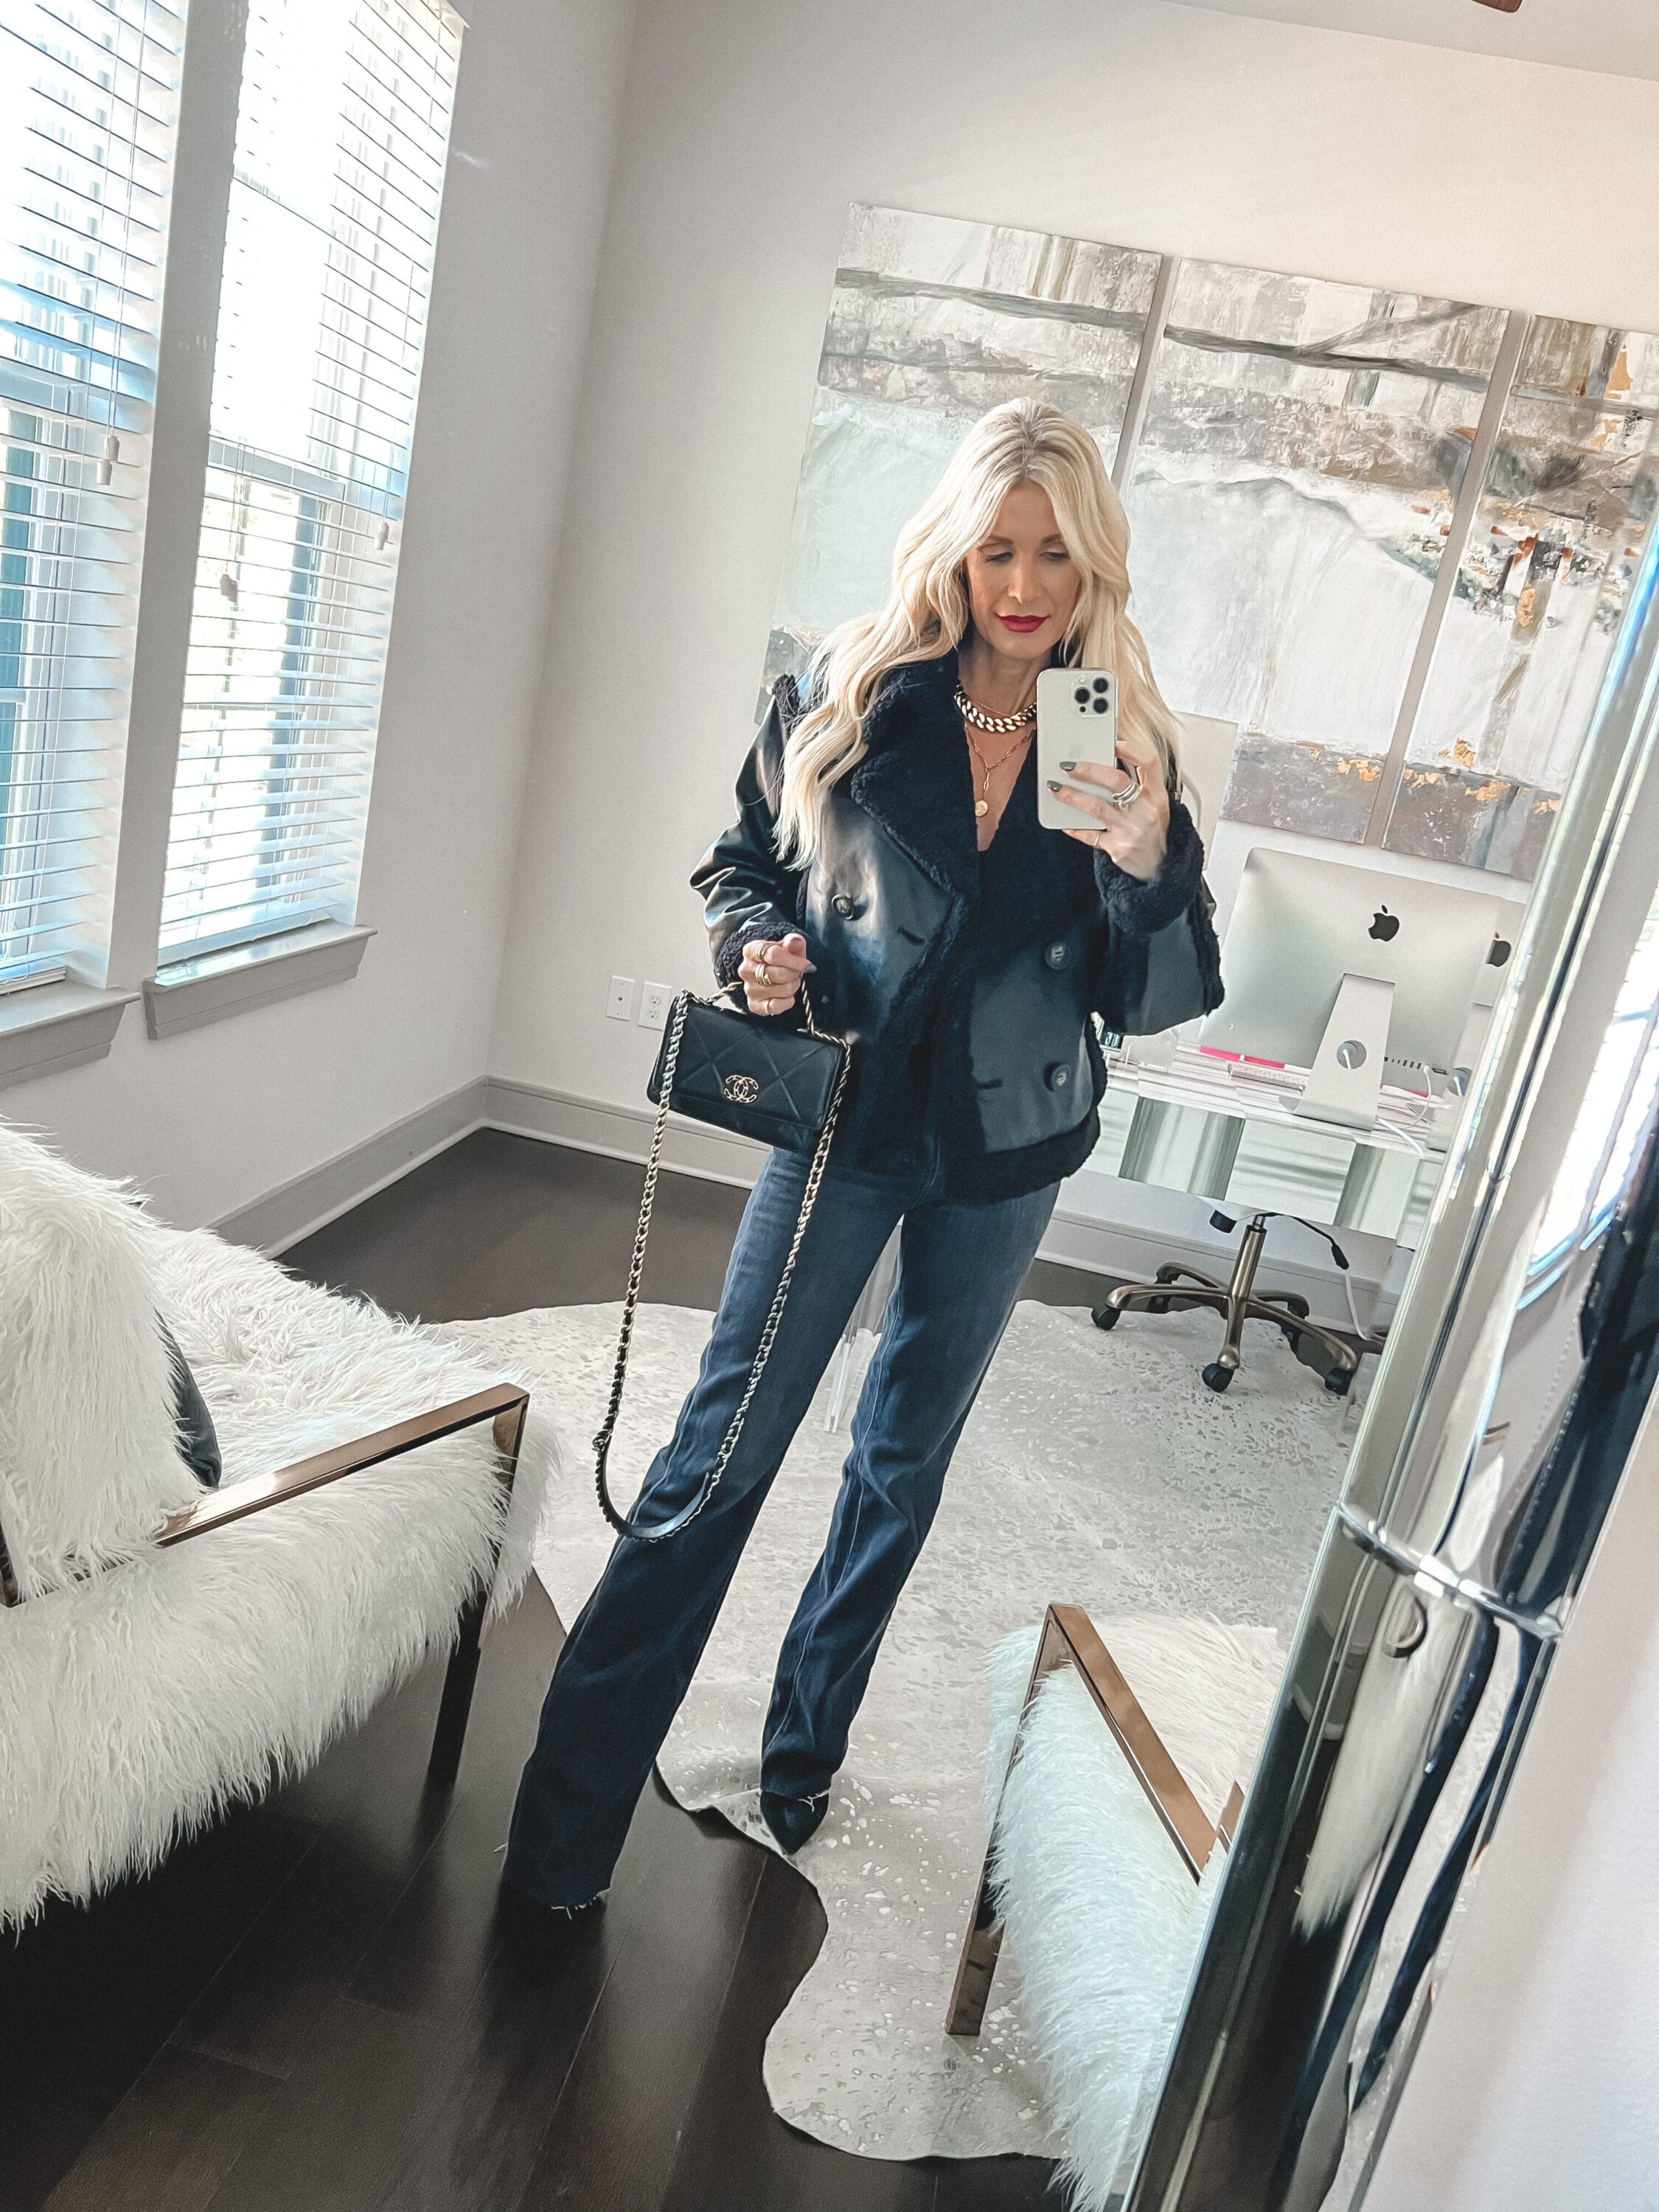 Dallas fashion influencer over 40 wearing faux fur and leather jacket with black vintage jeans as part of her winter coat edit.